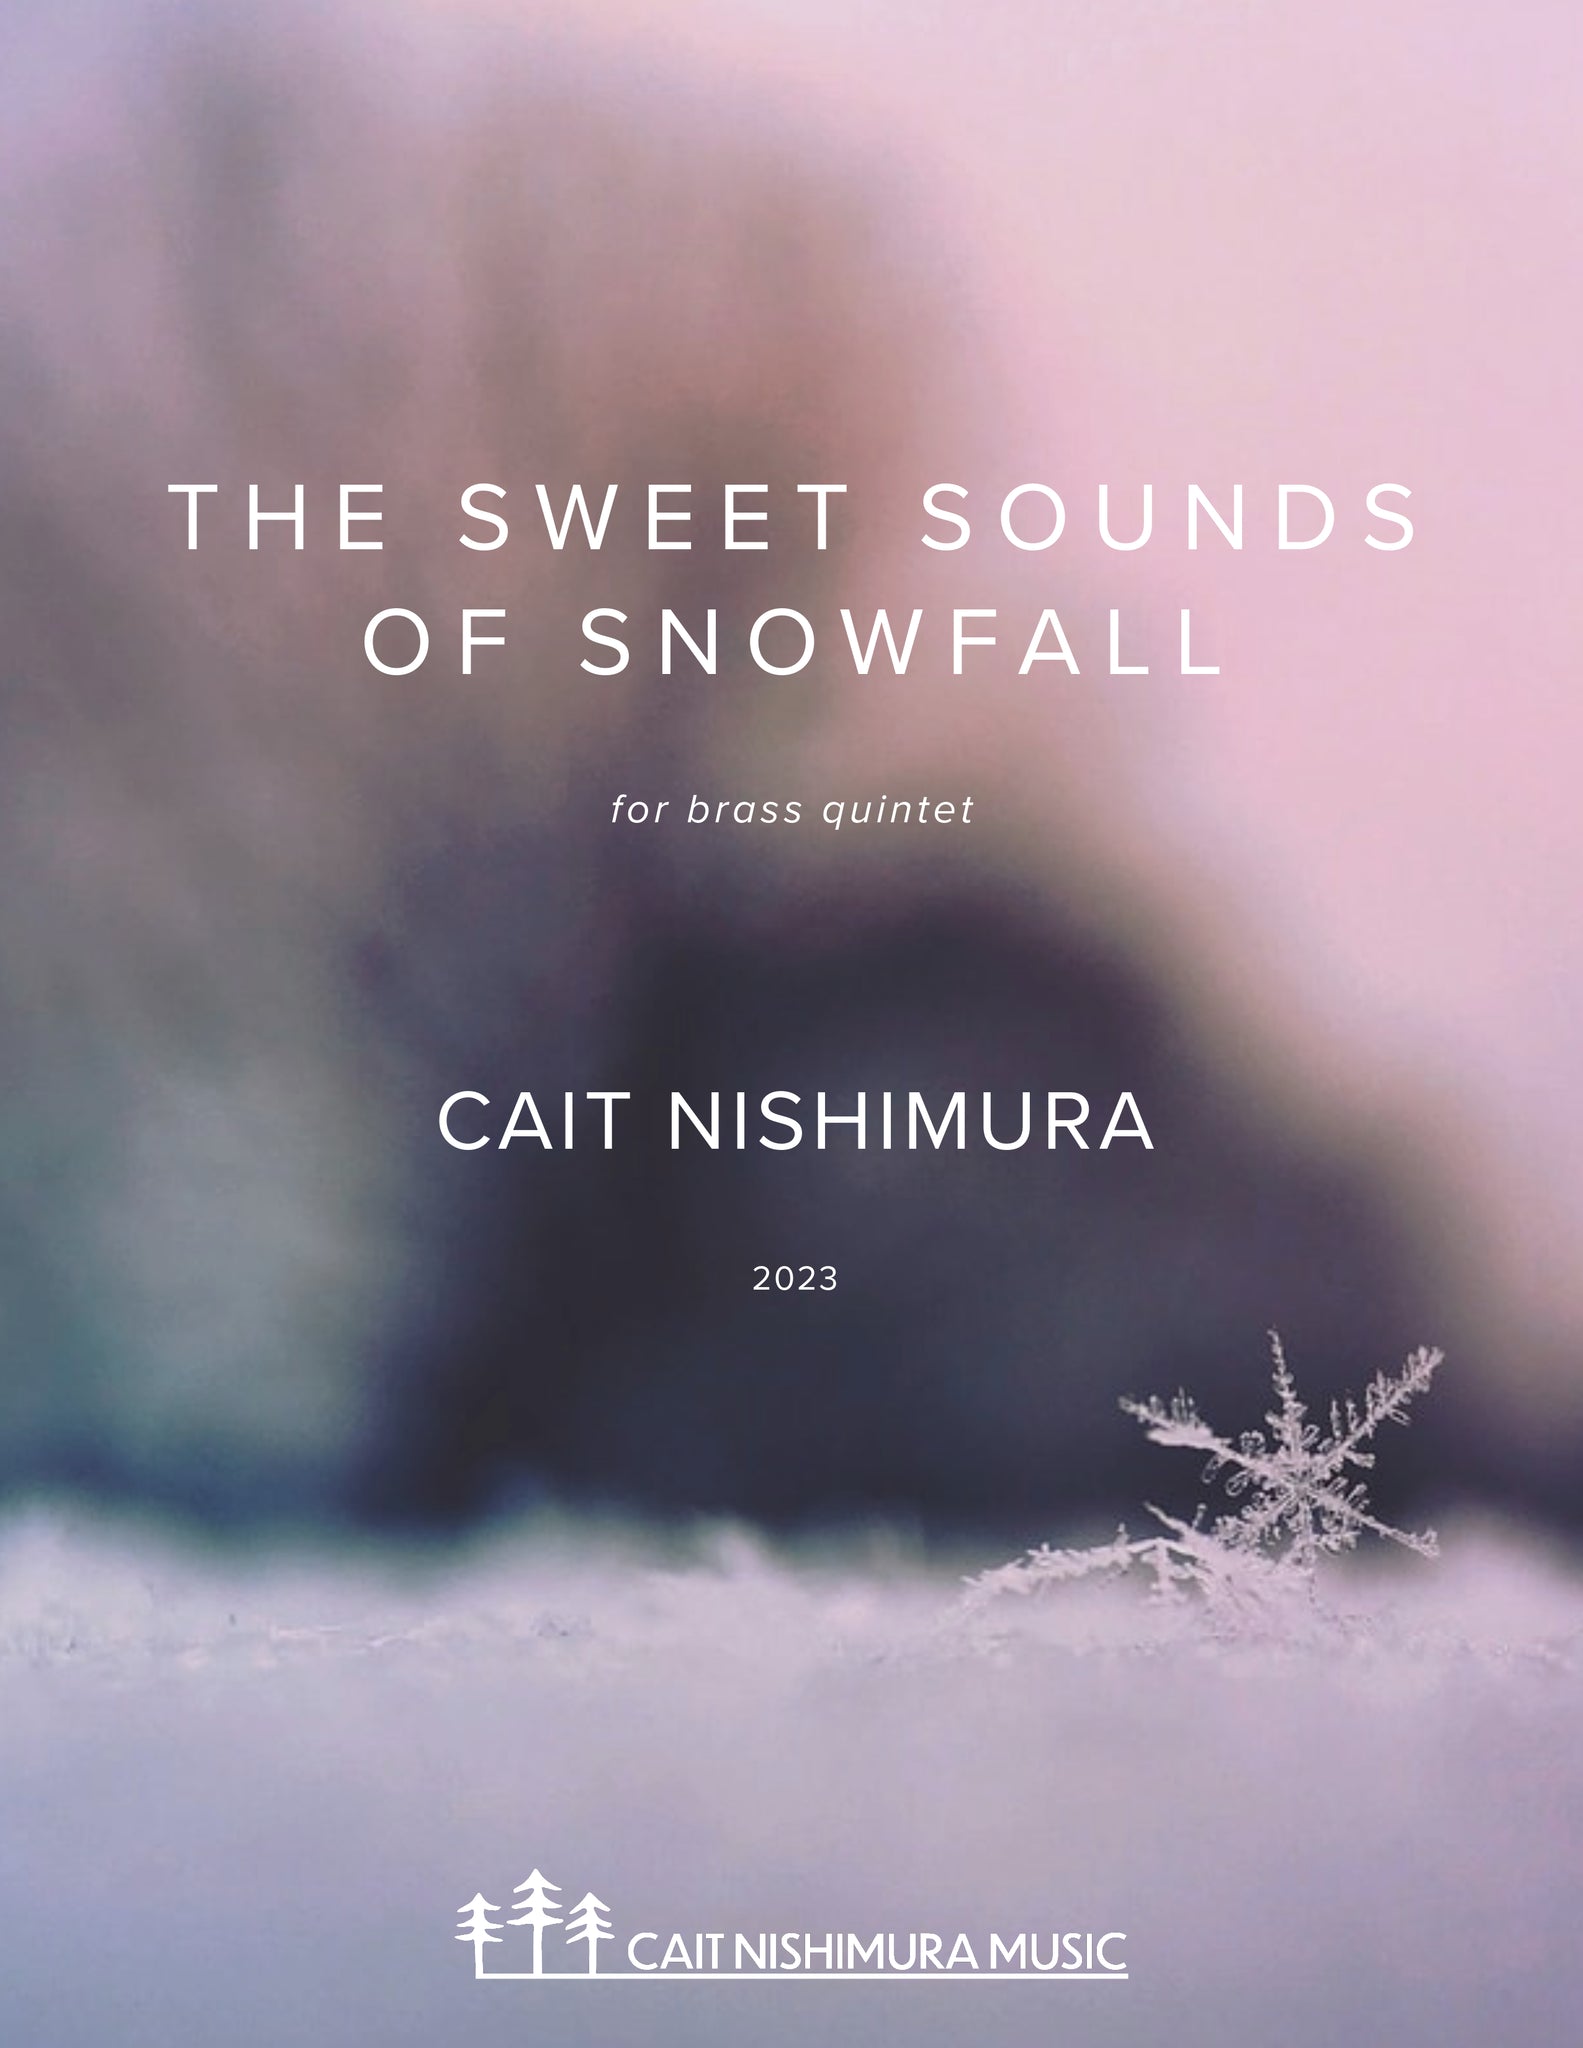 The Sweet Sounds of Snowfall (quintet version)